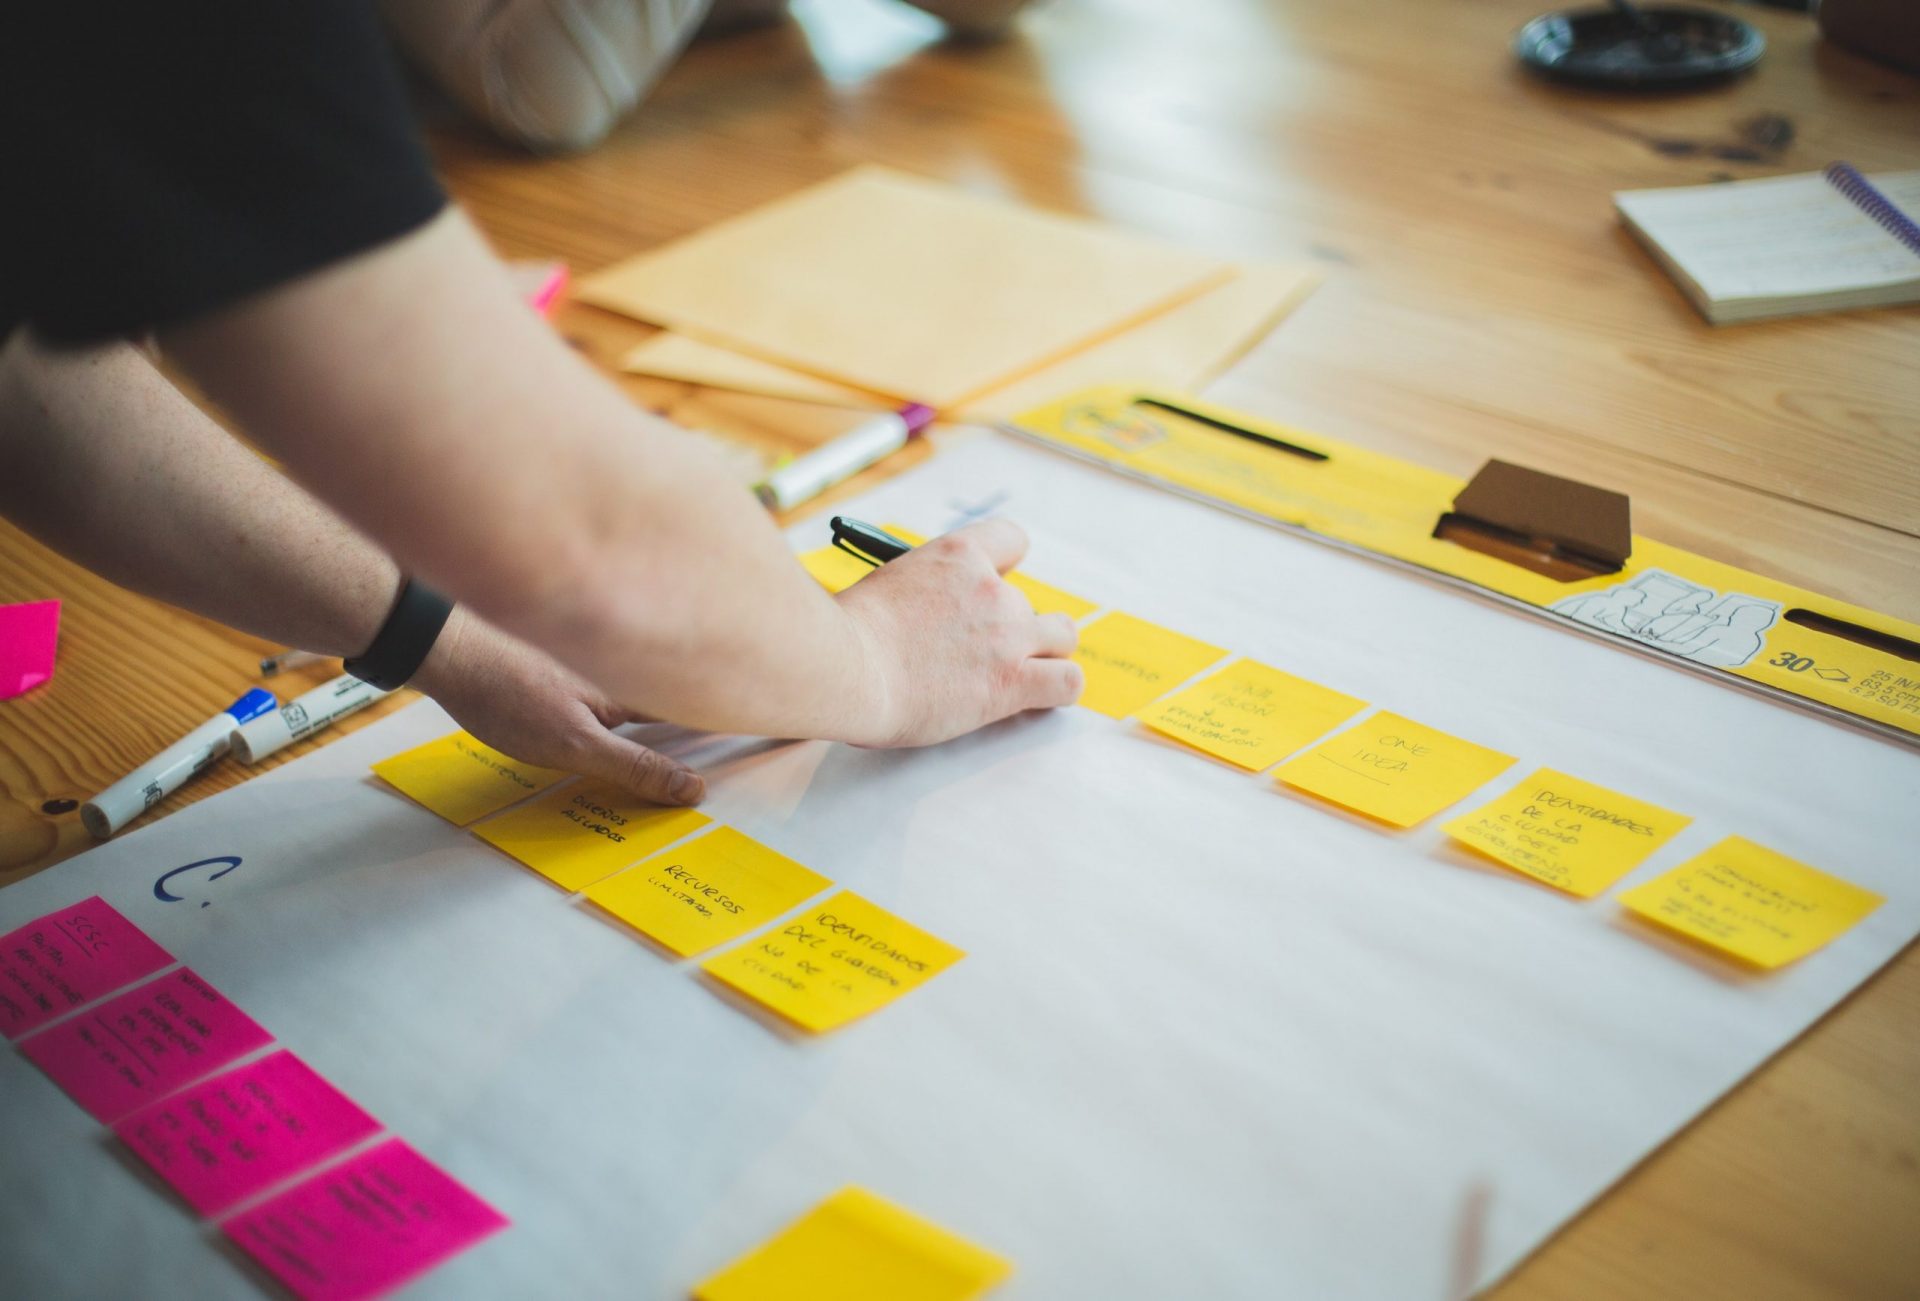 Creating a to-do using sticky notes can help you get organised